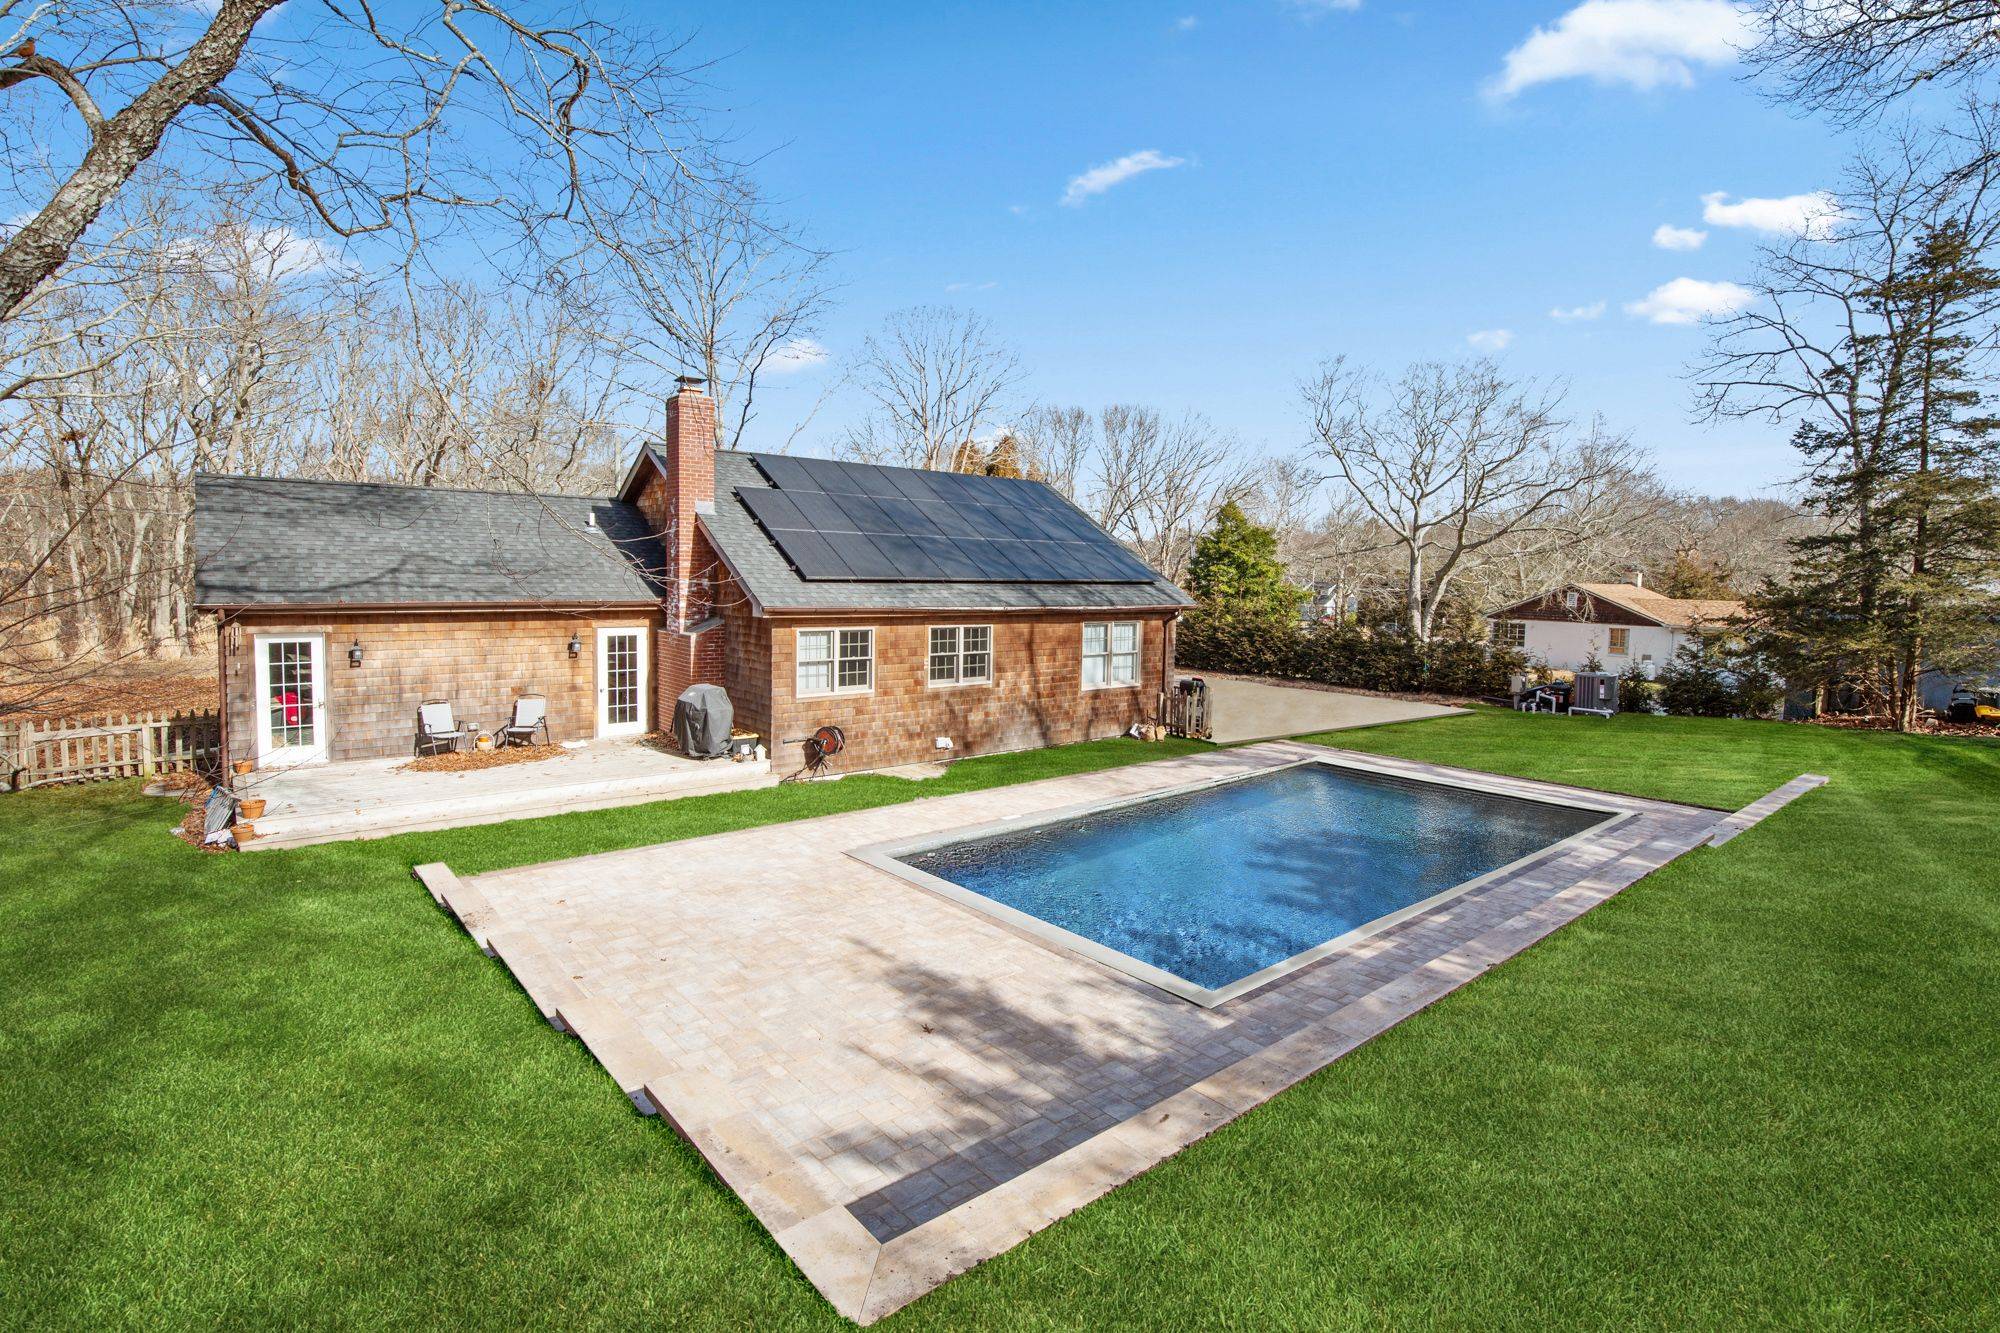 Hamptons Oasis: Luxury, Sustainability, & Income Potential Await